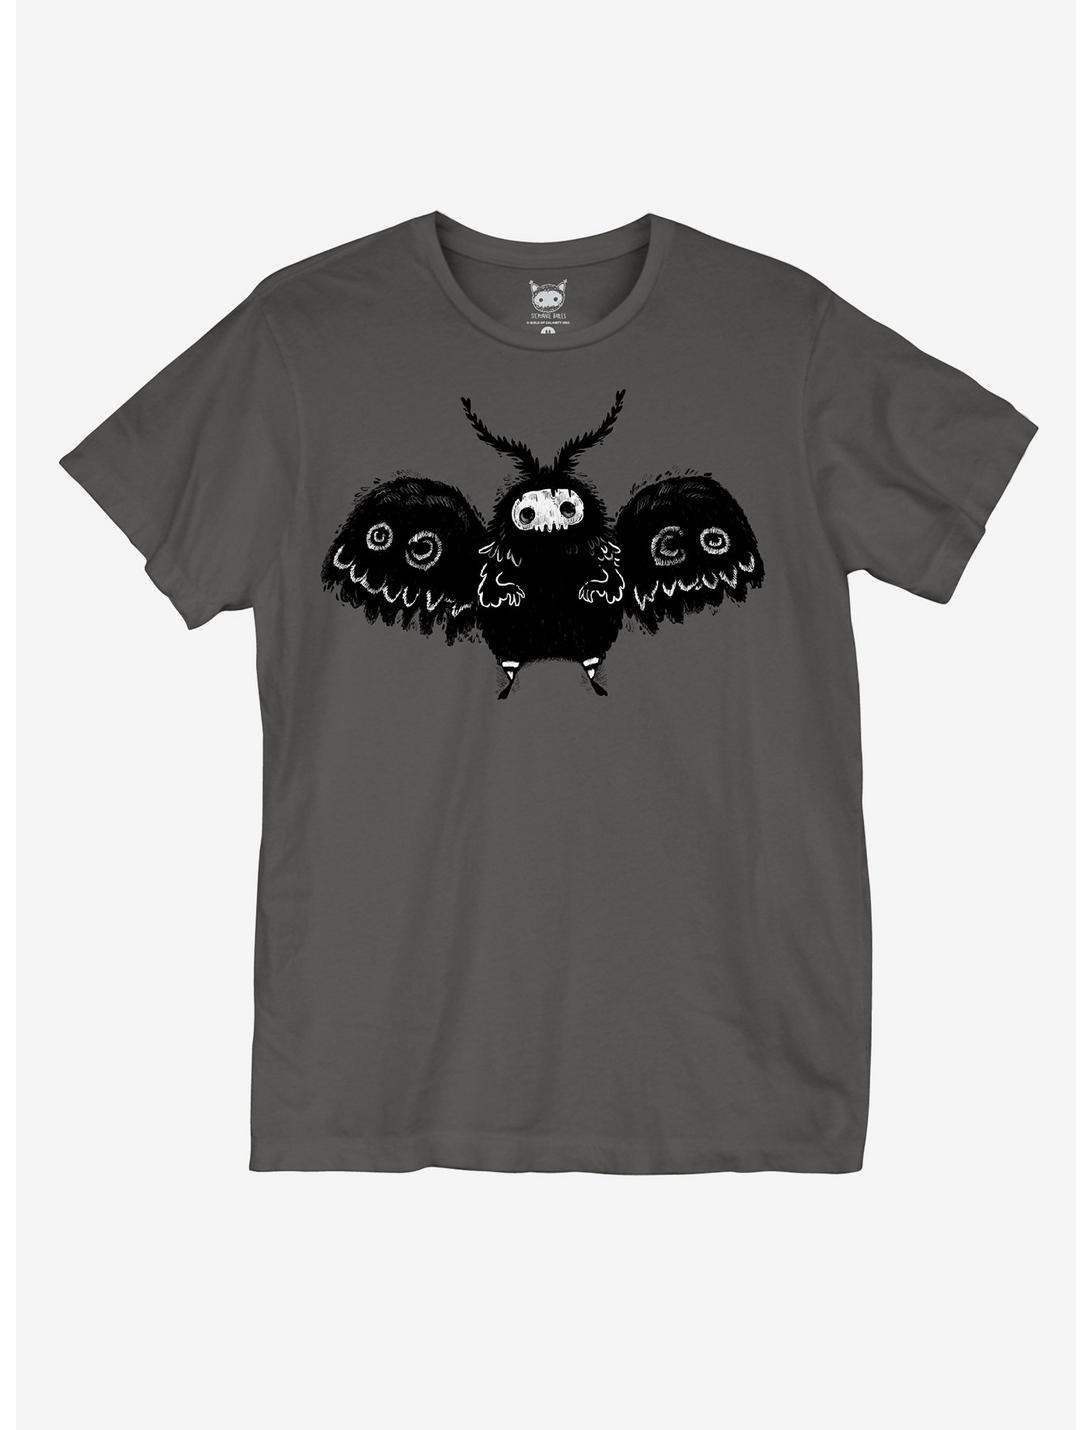 Skull Moth T-Shirt By Guild Of Calamity | Hot Topic